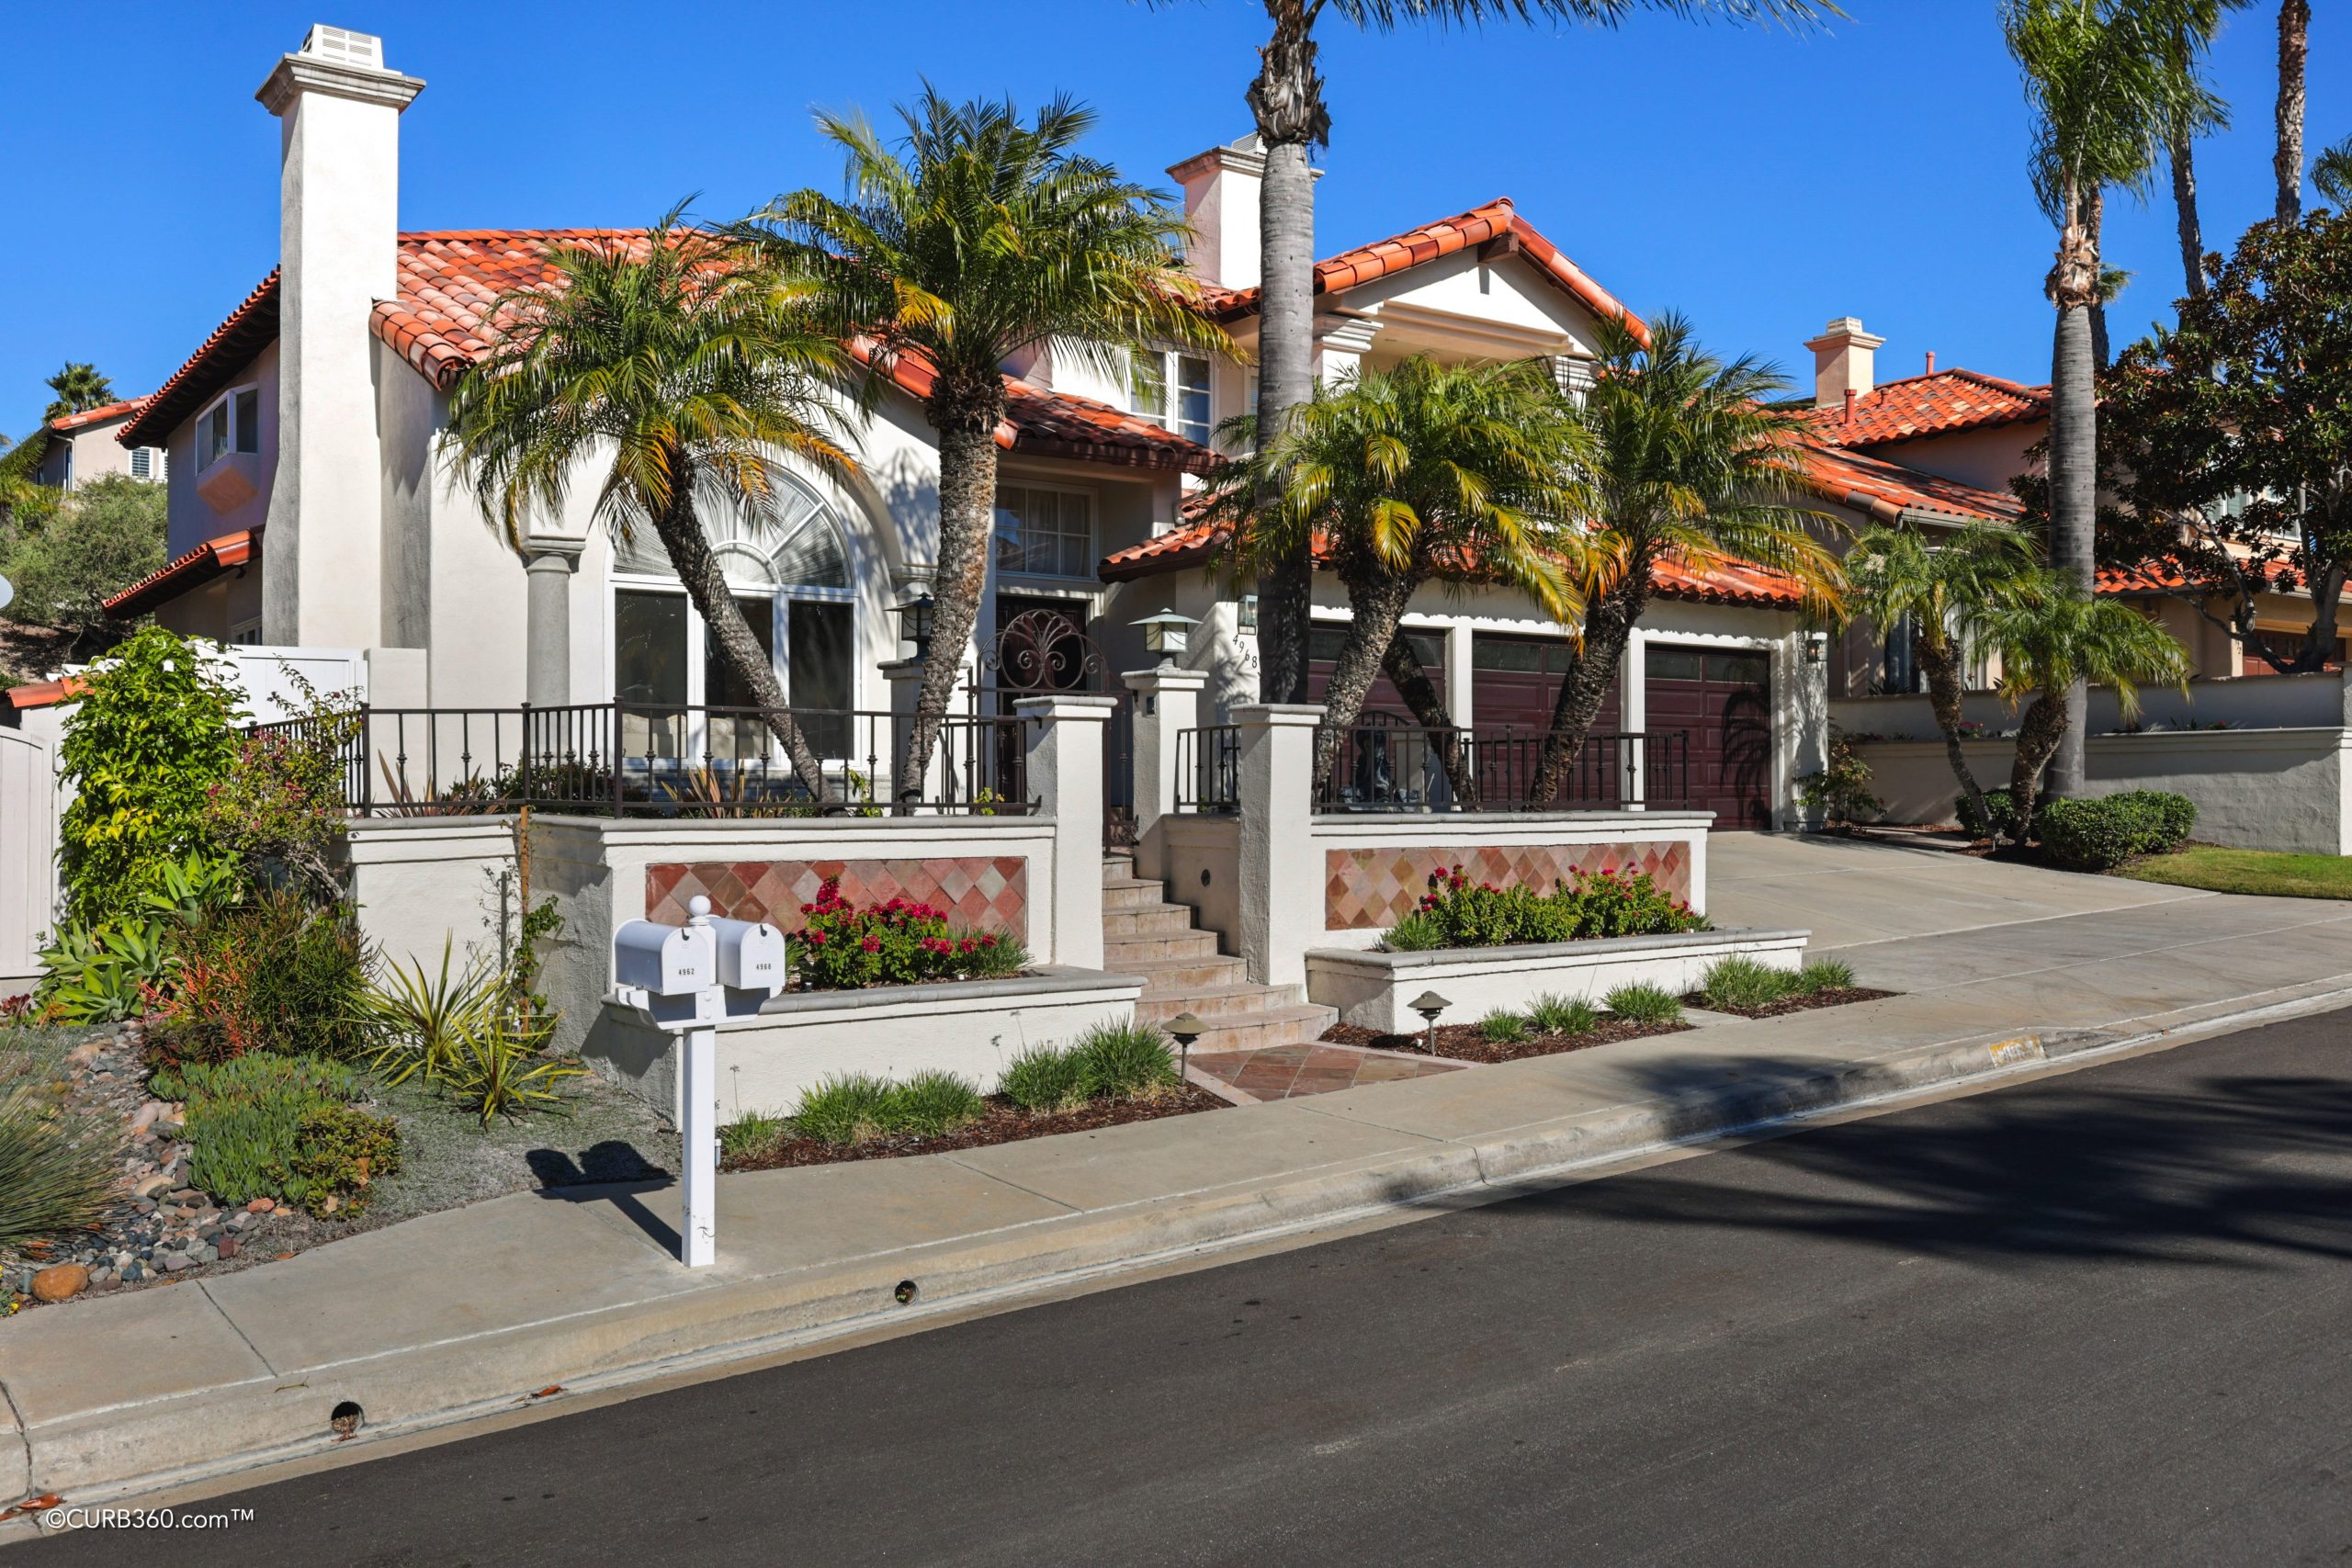 001_001_curb360_san_diego_real_estate_photography